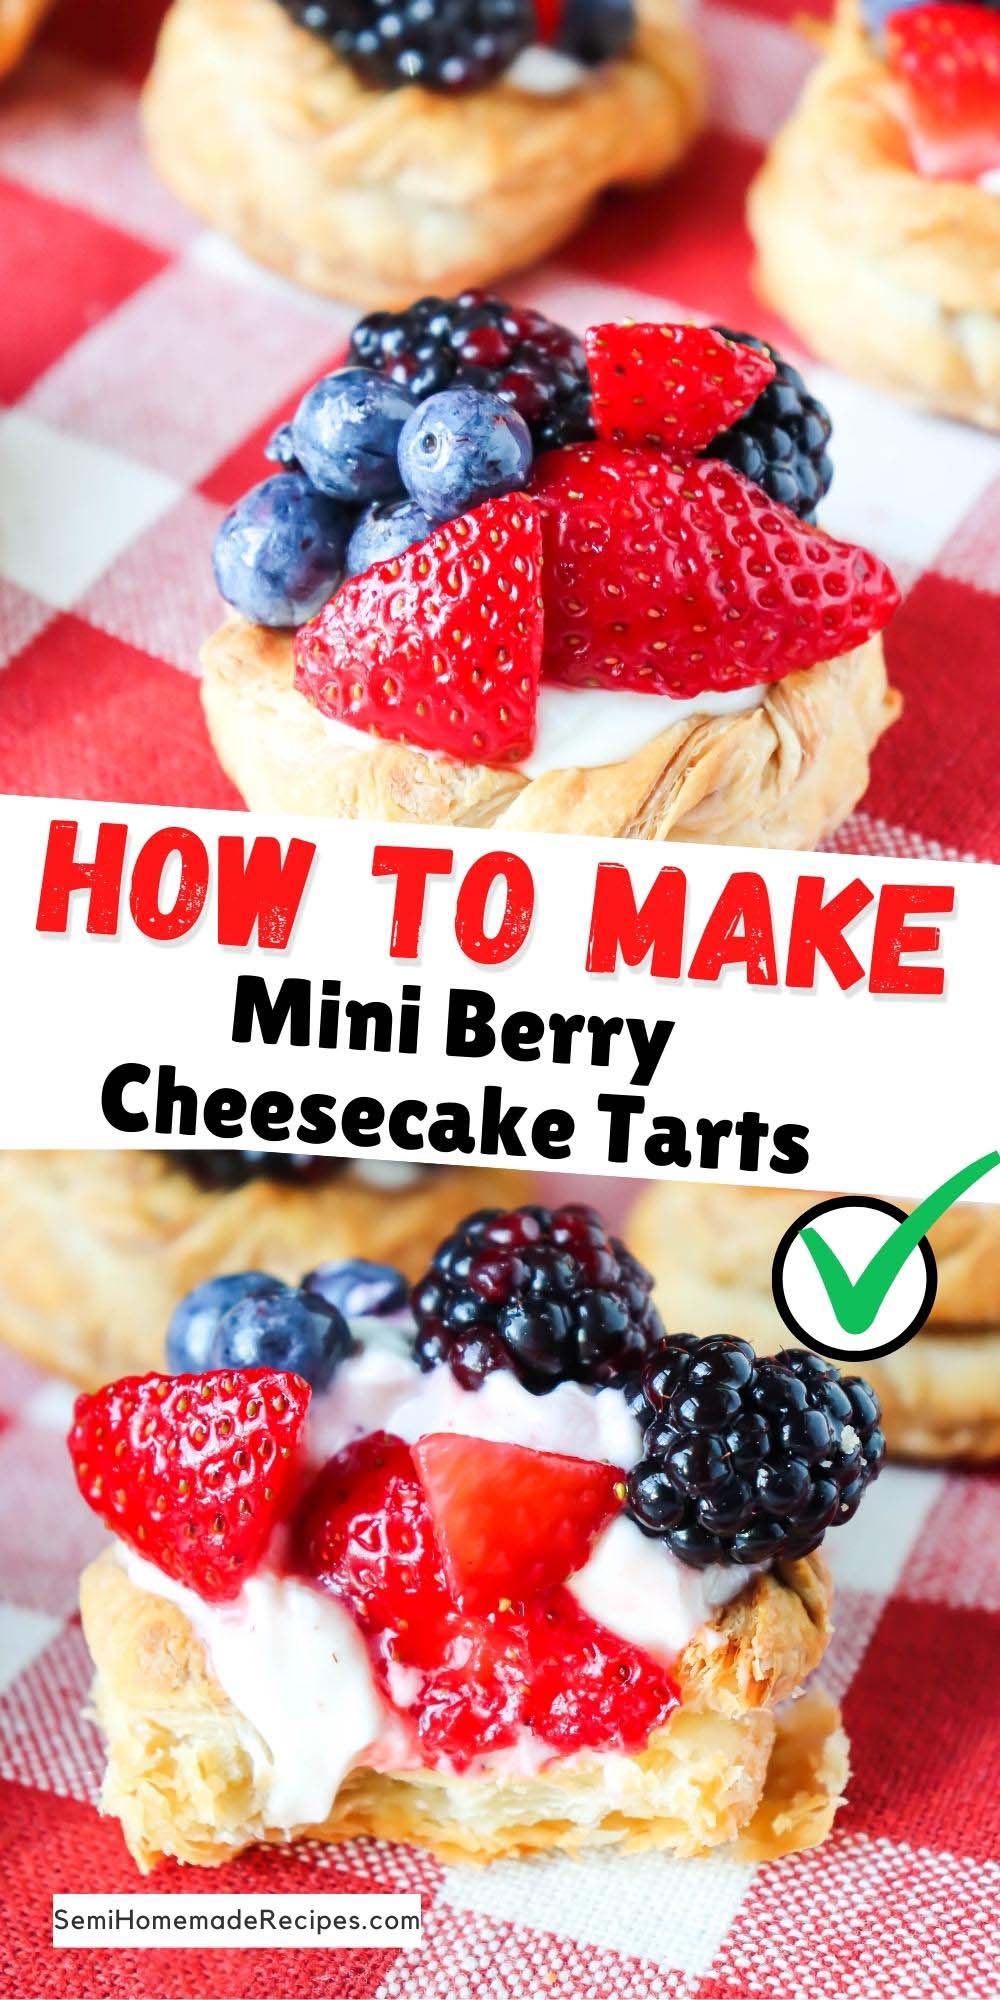 Mini Berry Cheesecake Tarts - baked store bought puff pastry filled with an easy homemade cheesecake filling and topped with sweet fresh fruit!